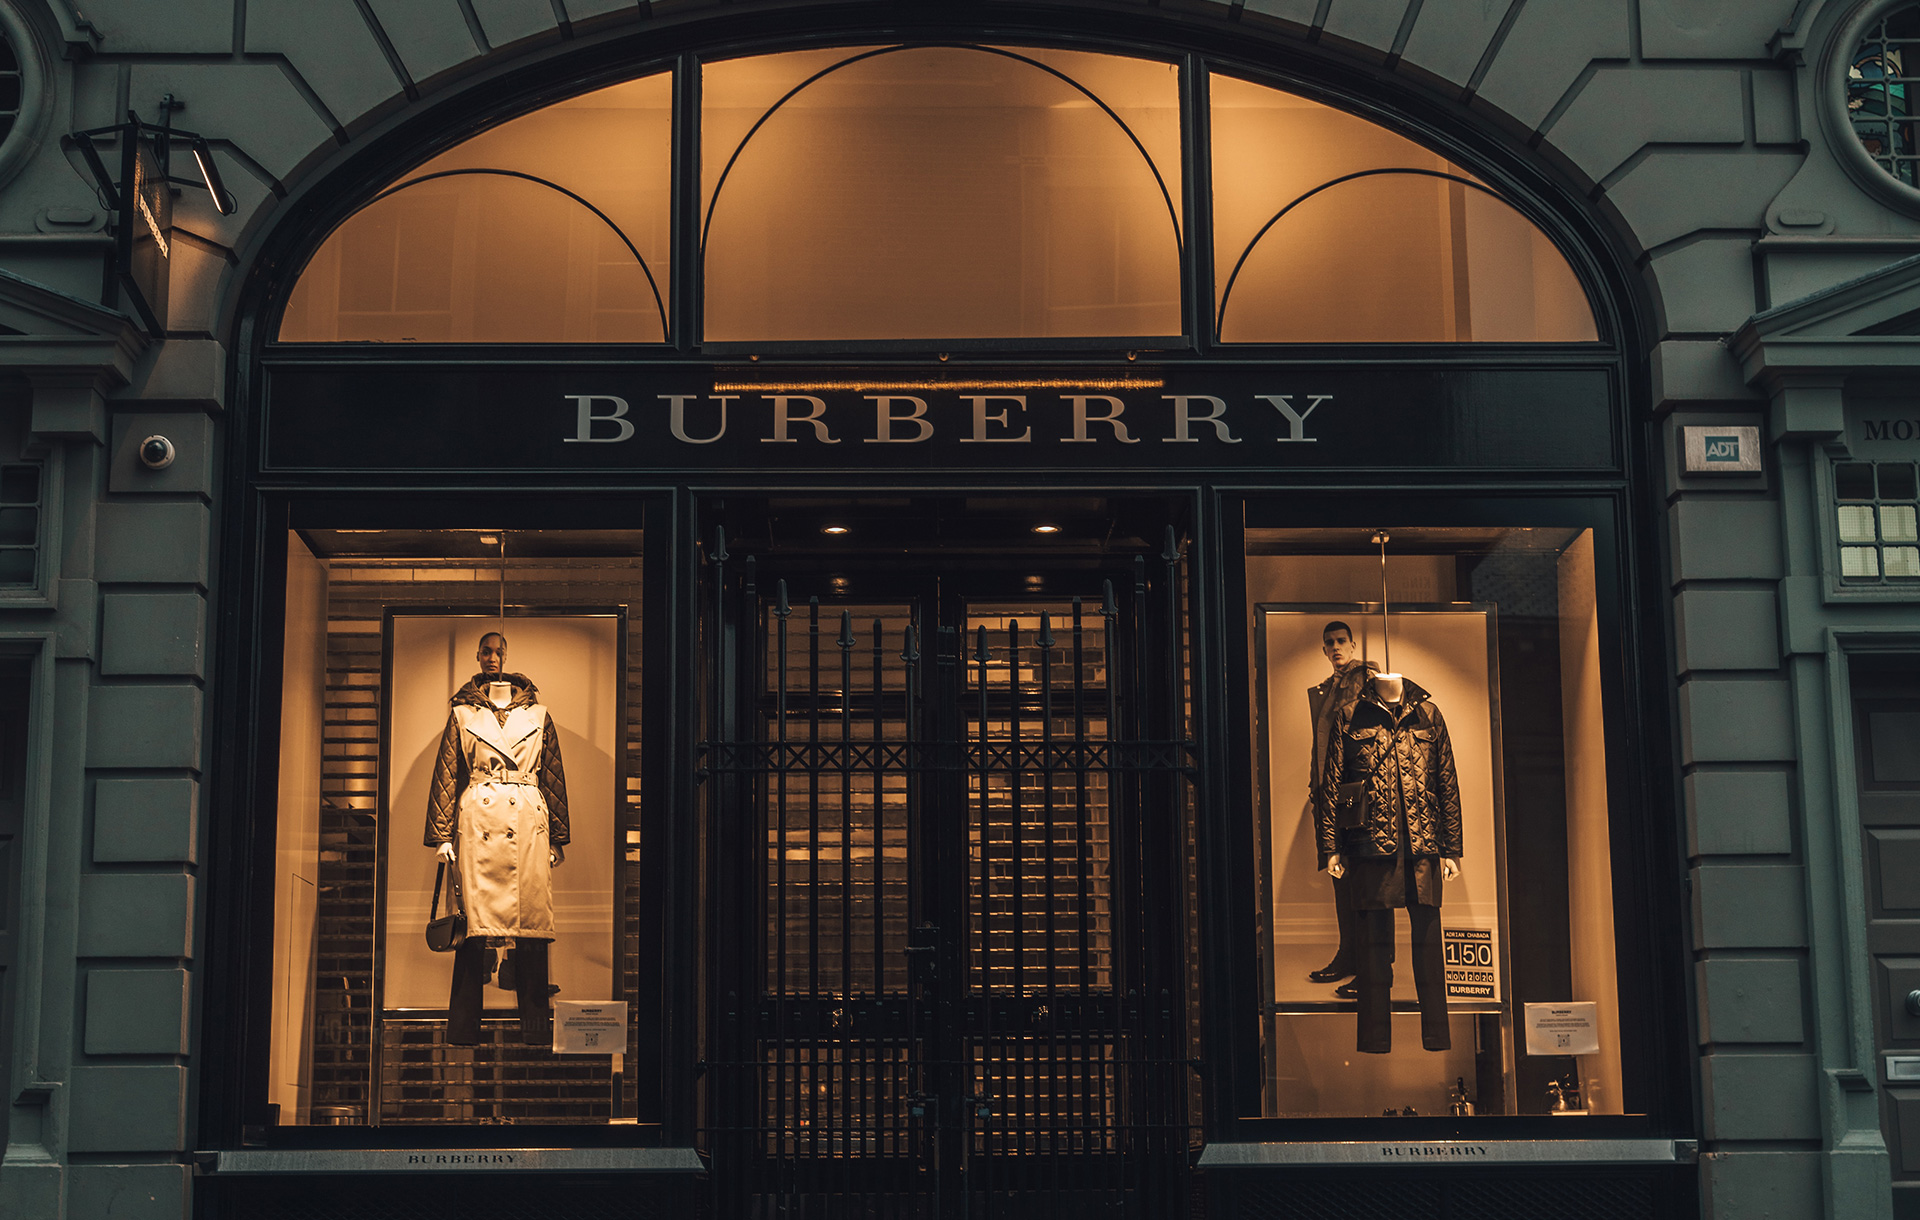 Burberry – from chavvy to tech-savvy.